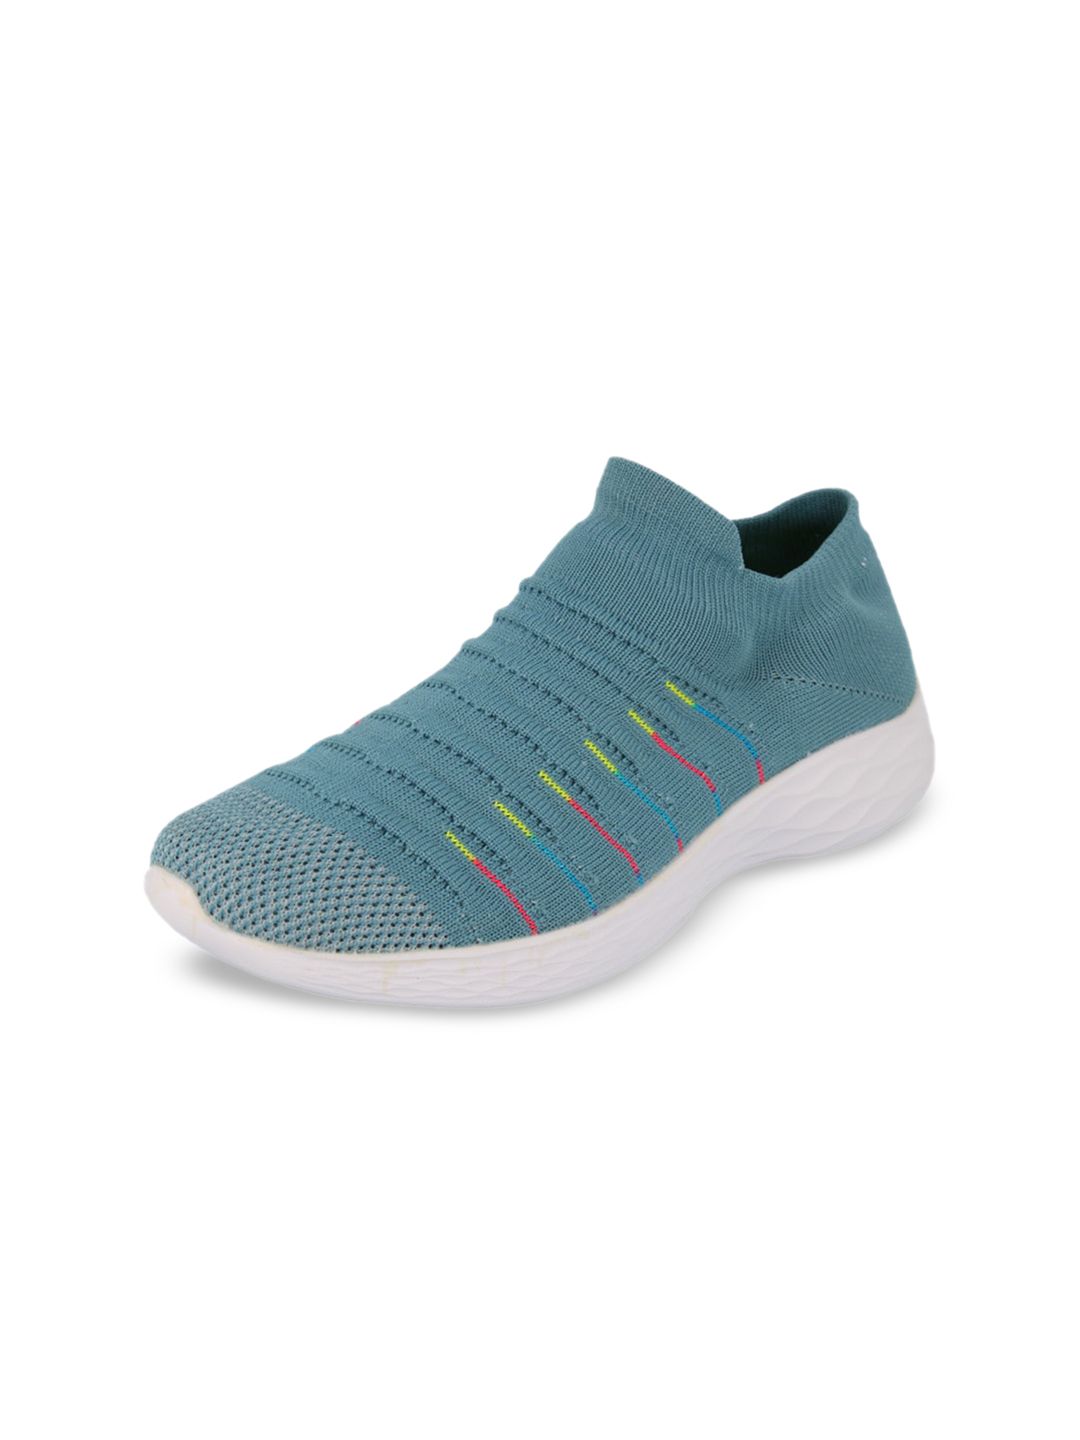 Sparx Women Blue Woven Design Slip-On Sneakers Price in India